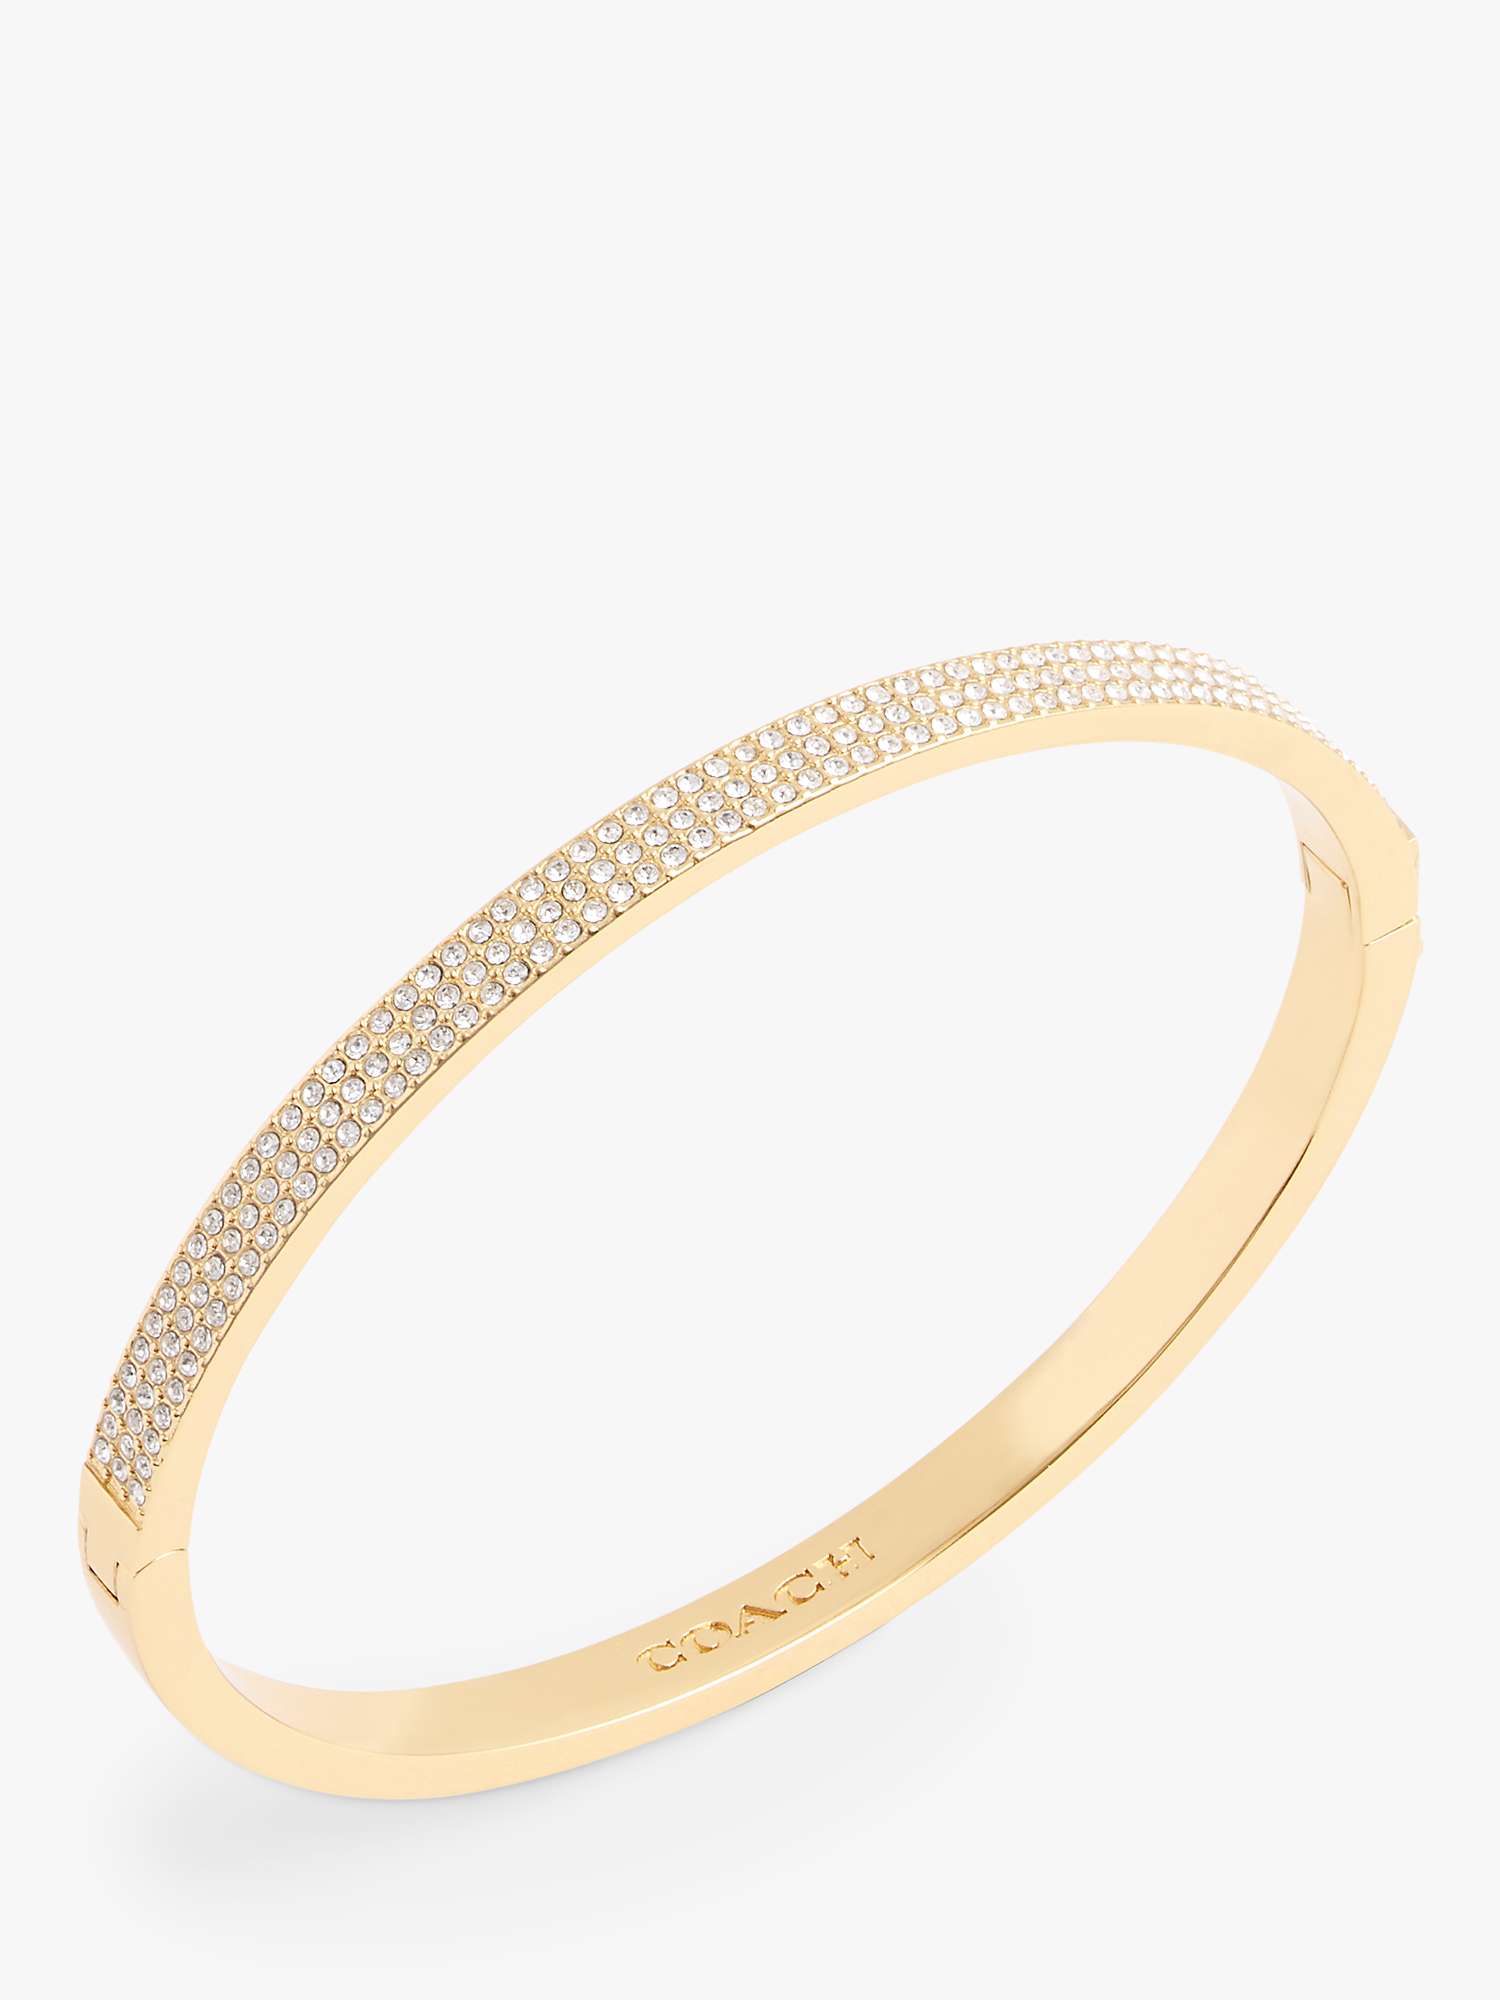 Buy Coach Crystal Hinged Bangle Online at johnlewis.com